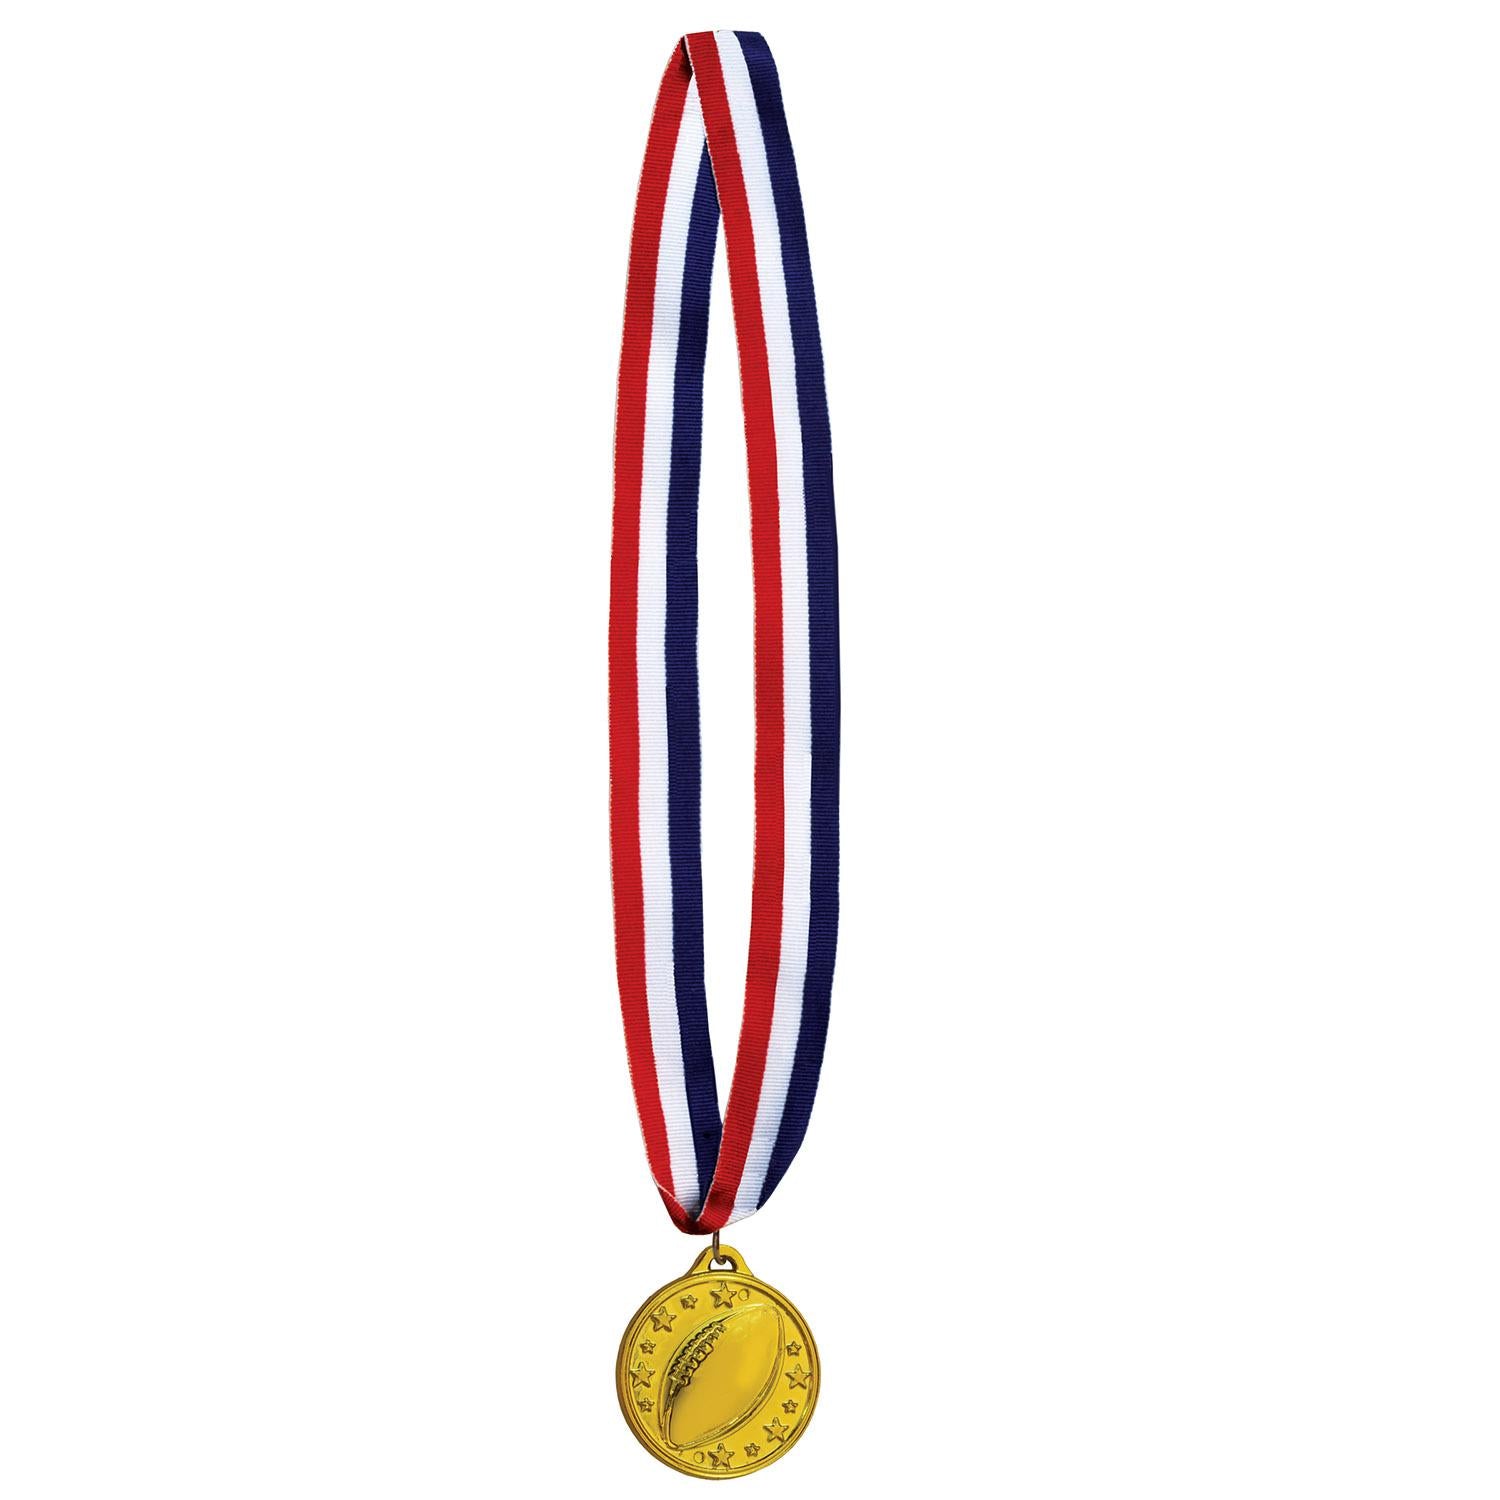 Beistle Football Medal with Ribbon